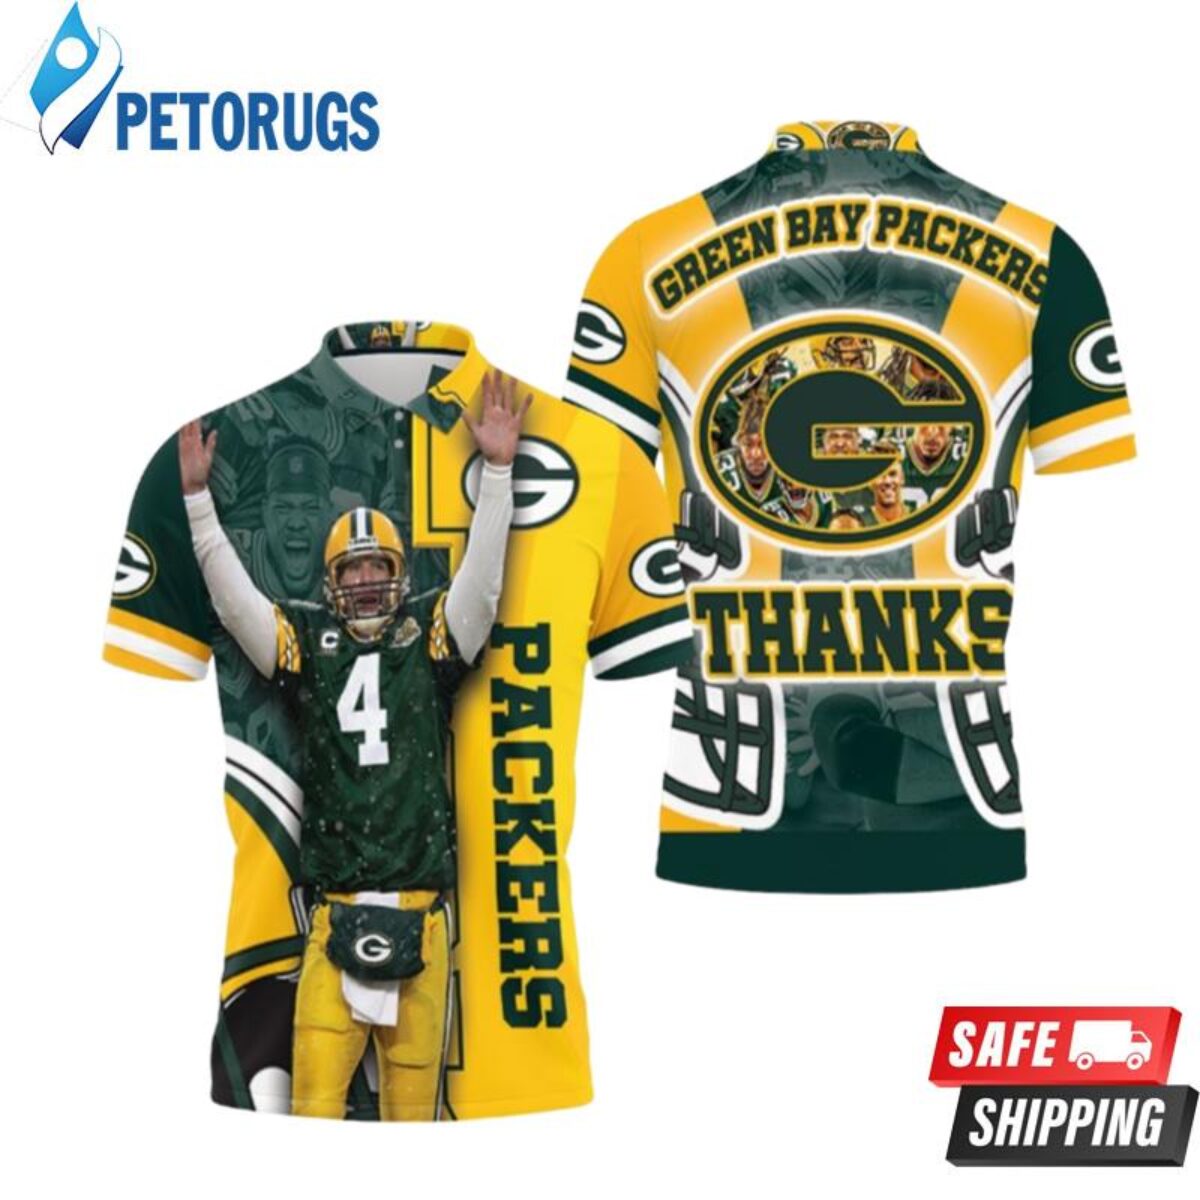 Green Bay Packers Logo Nfc North Champions Super Bowl 2021 Personalized  Polo Shirts - Peto Rugs